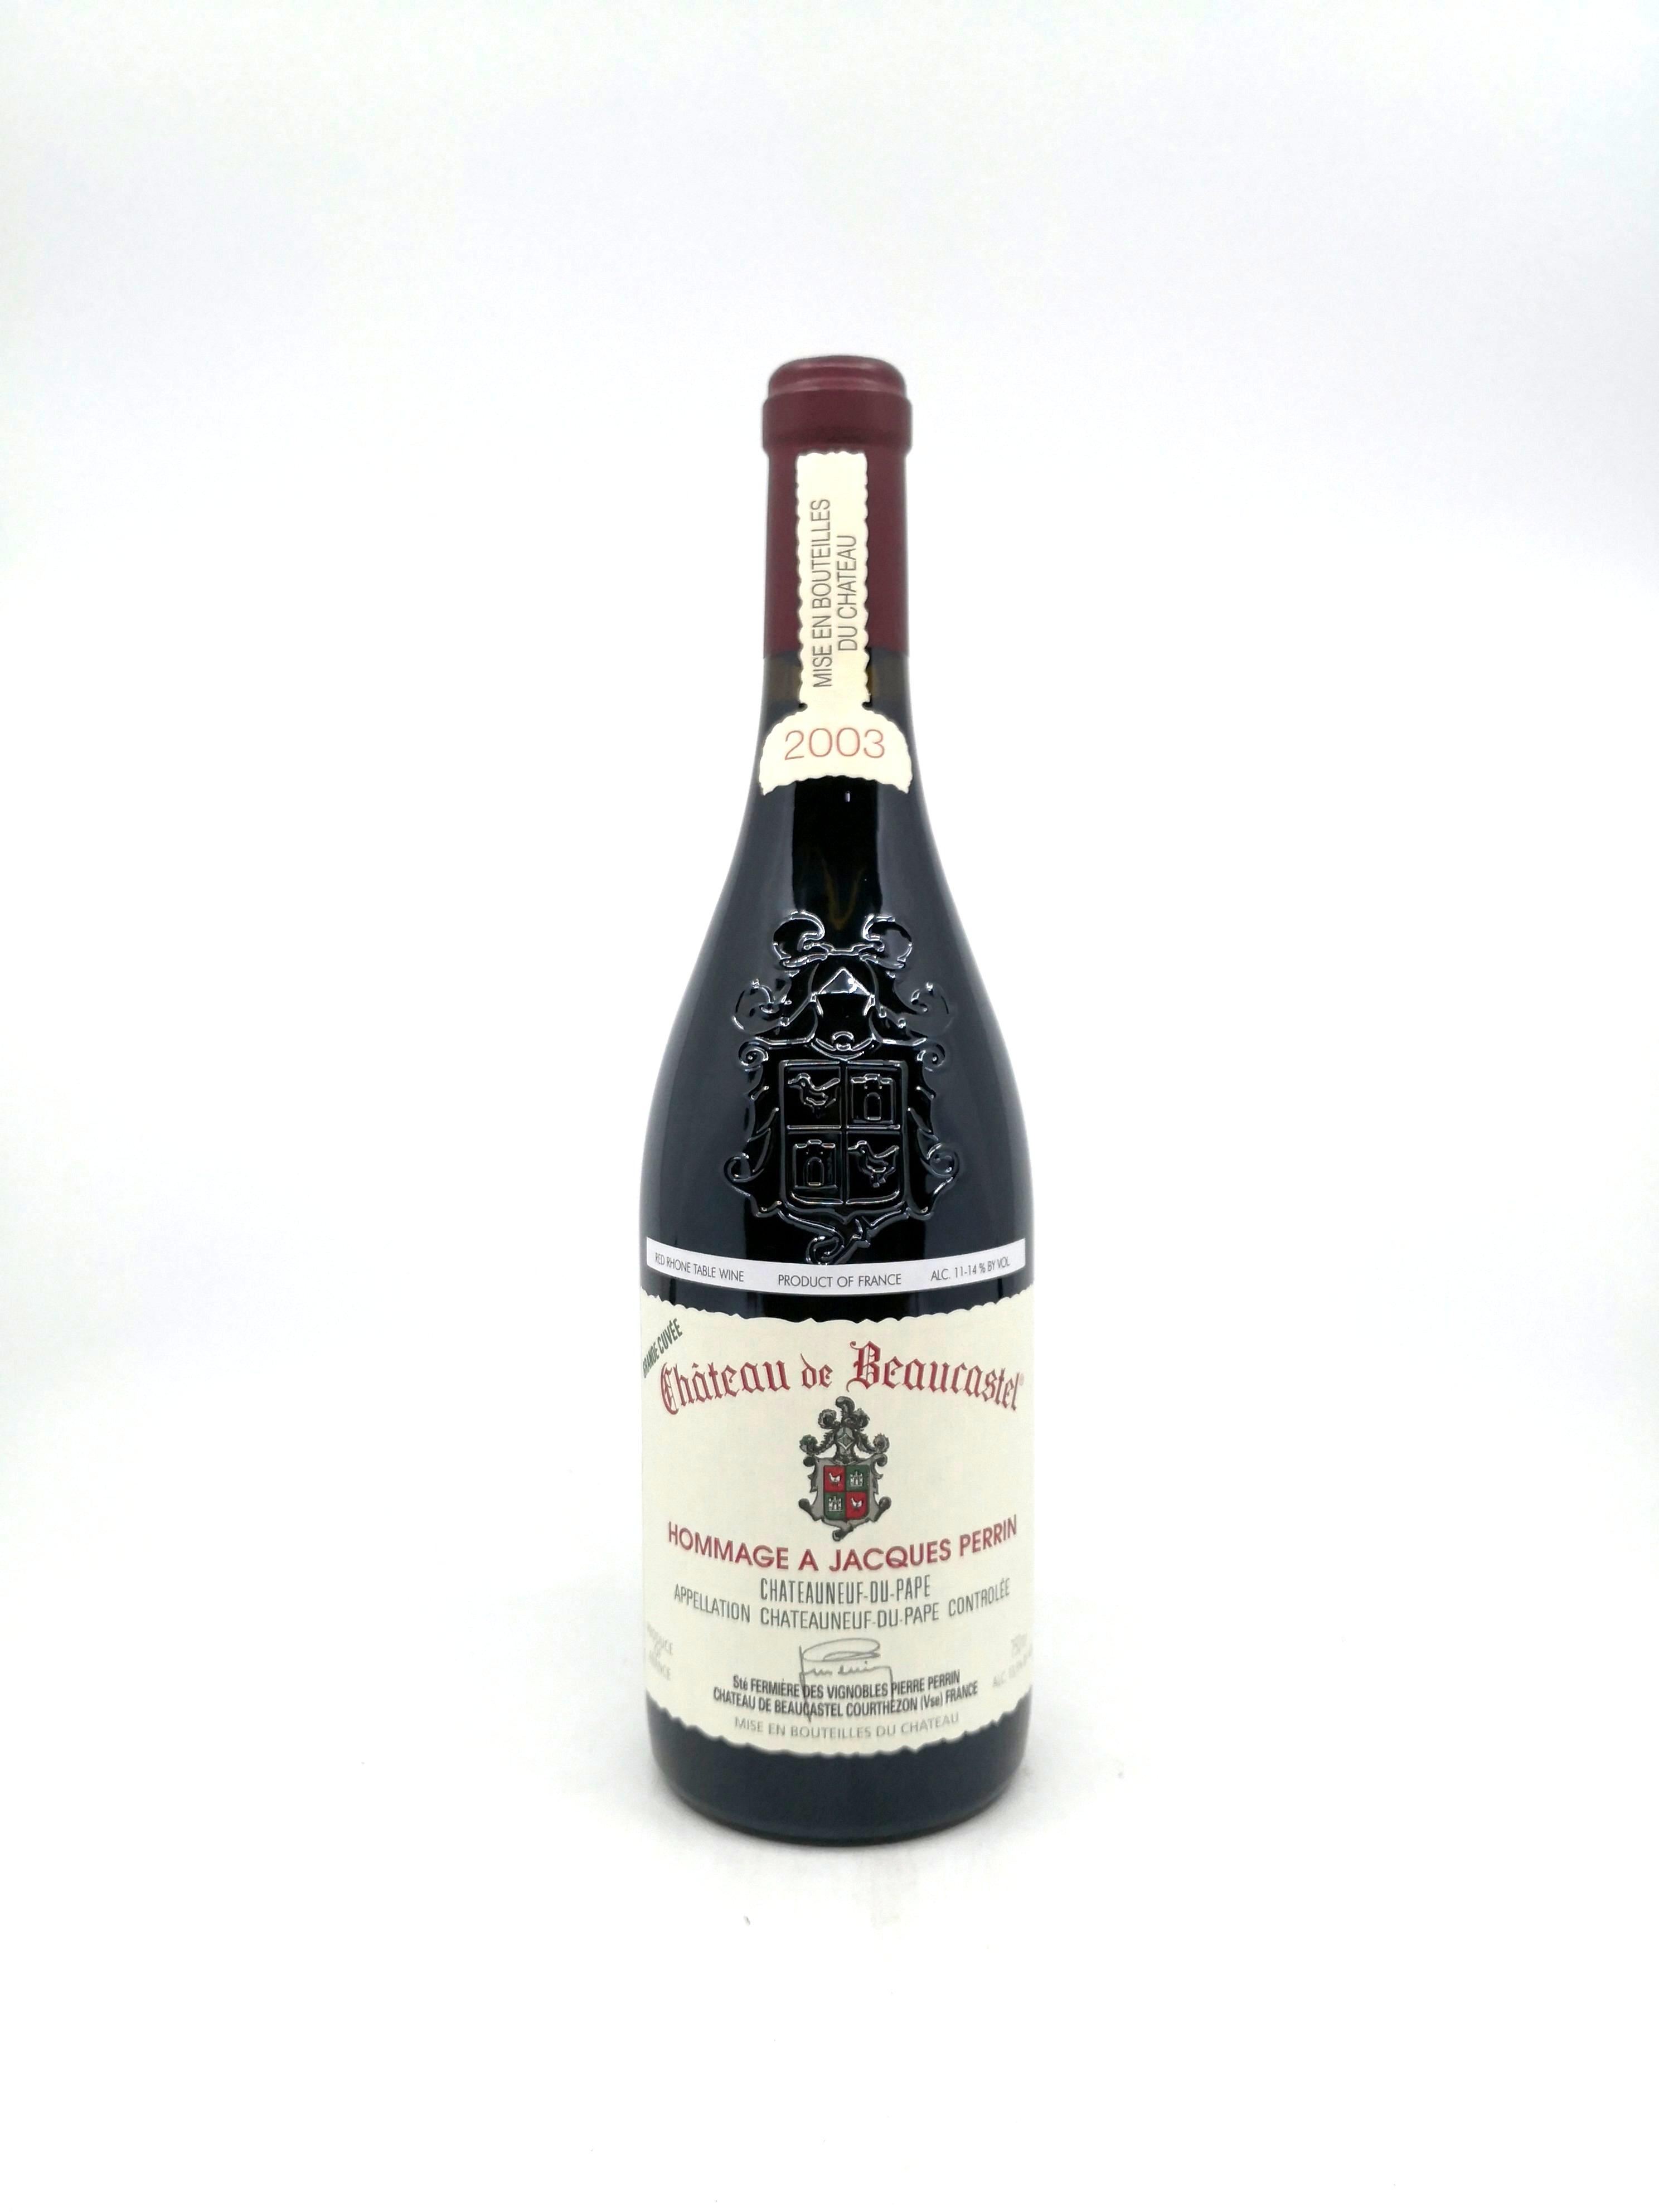 Beaucastel Chateauneuf du Pape Hommage A Jacques Perrin 2003